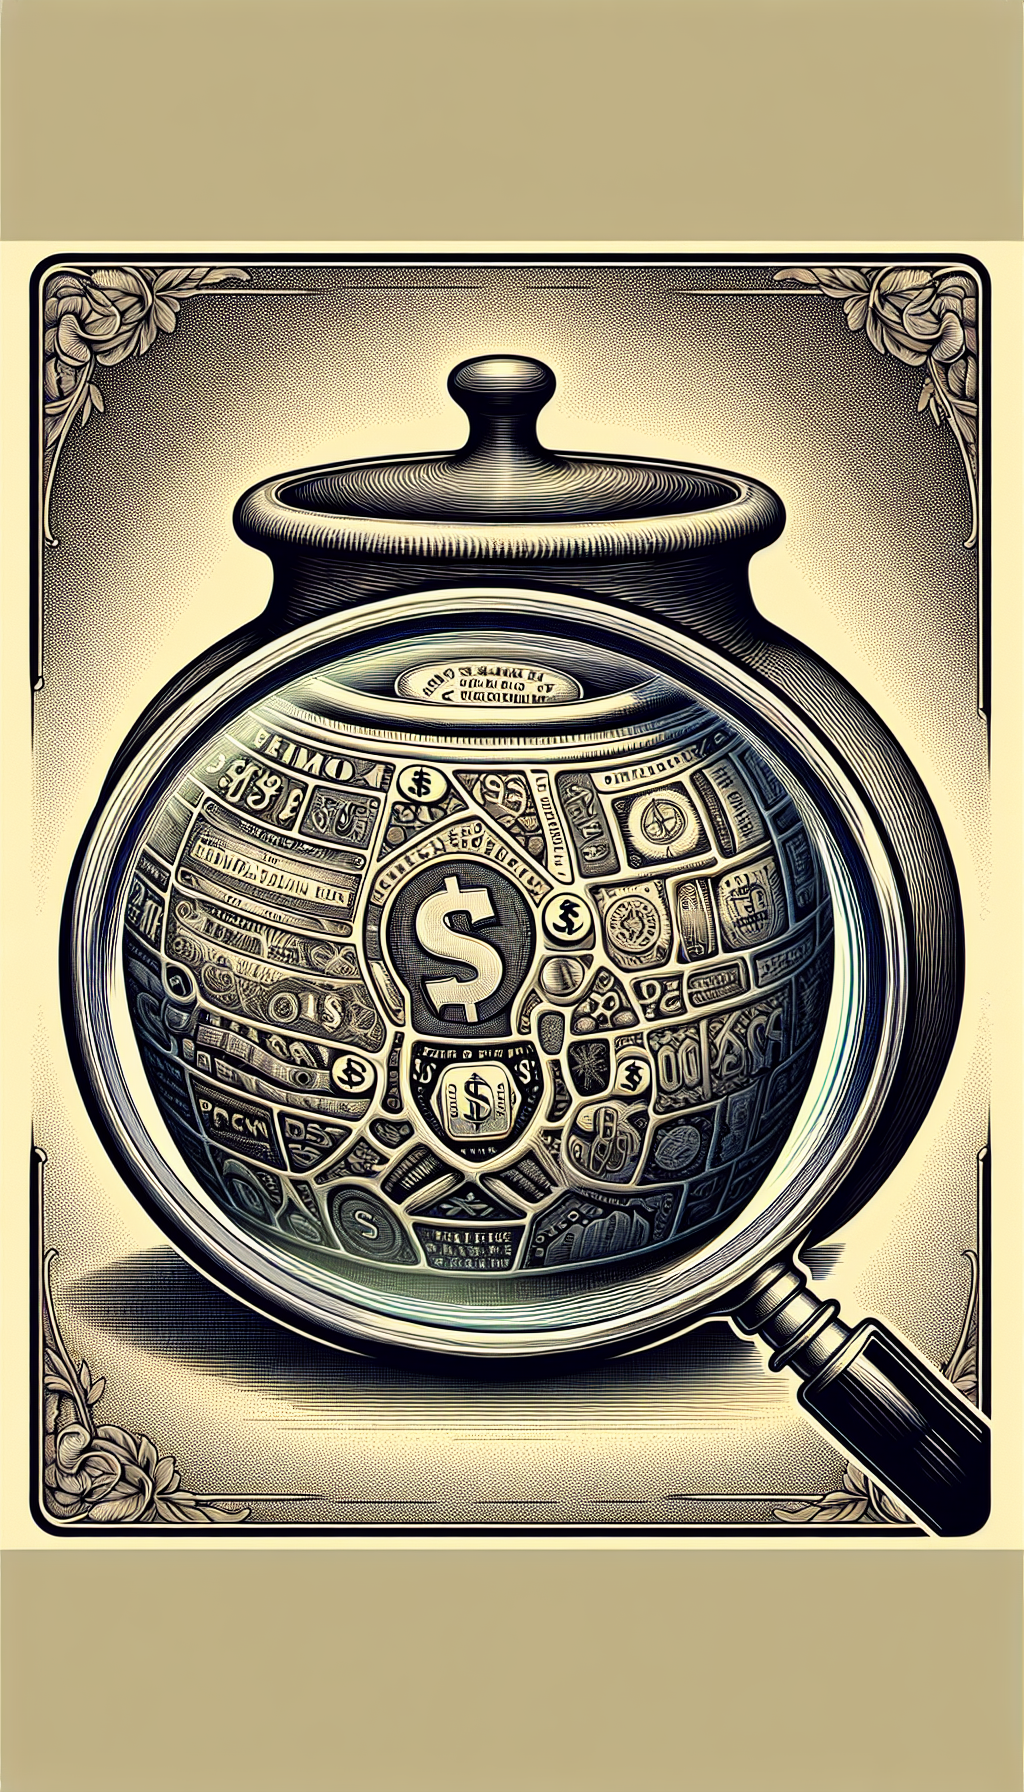 An intricate magnifying glass zooms in on the base of a detailed antique 5-gallon crock, revealing a mosaic of maker's marks and origin symbols intertwined with dollar signs and aged patina textures. The glass frame transitions from vintage line art to a realistic portrayal, reflecting the fusion of historical craftsmanship and the crock's monetary legacy.